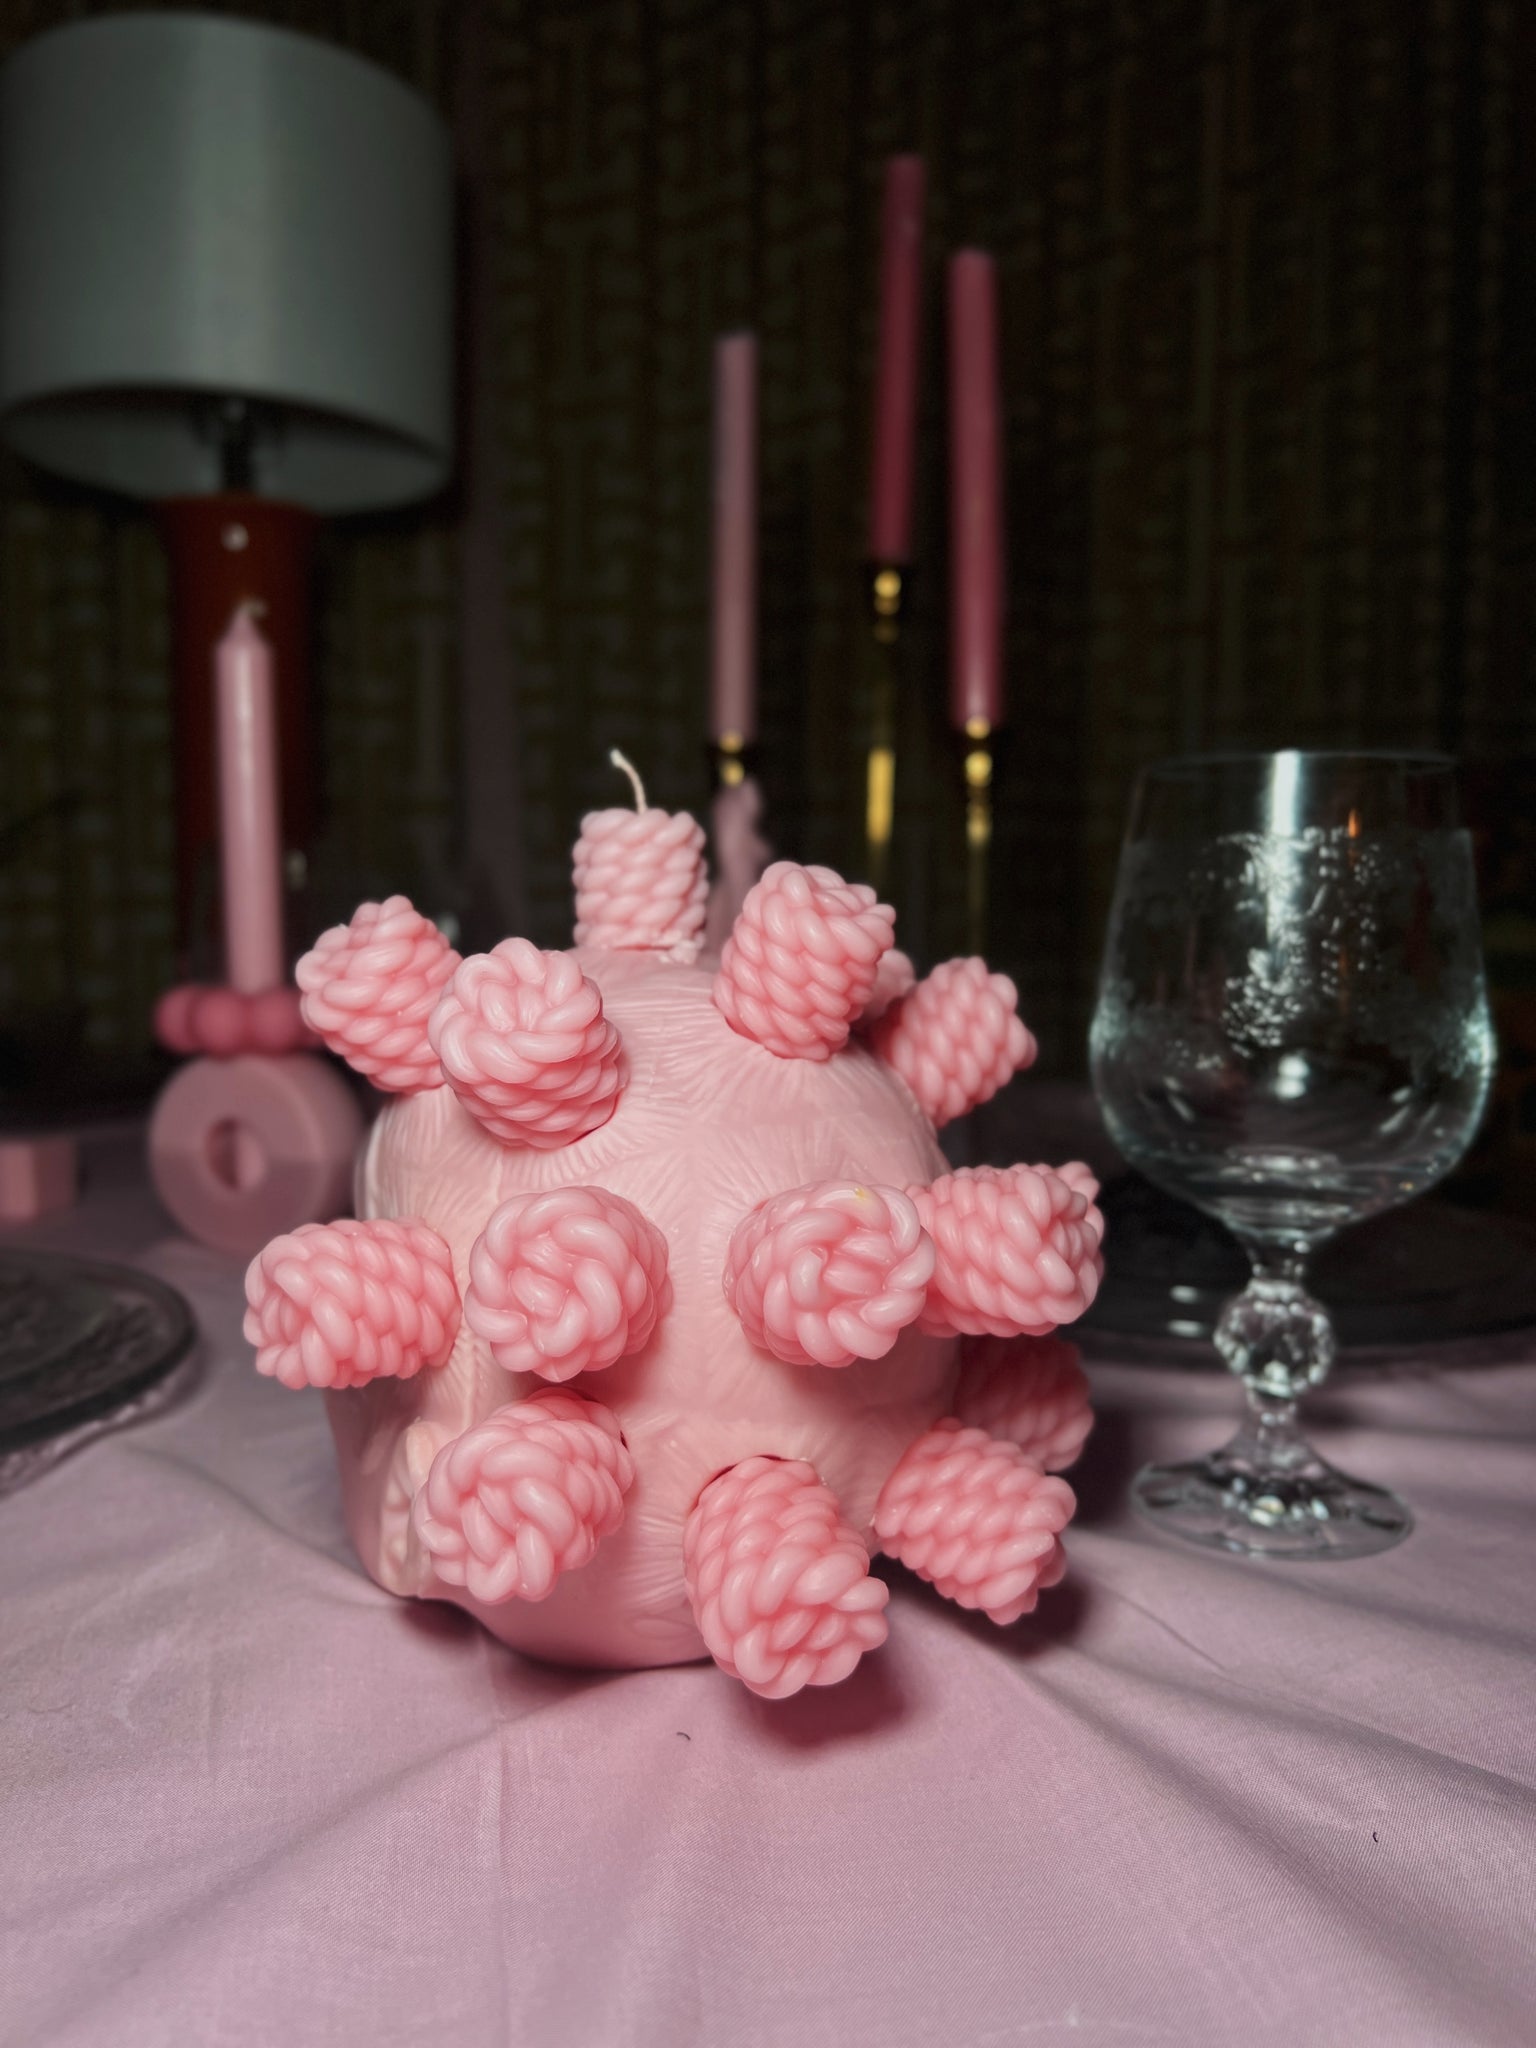 Crown Glory Bantu Knot Candle in Pink Kitty ™ (removable knots) - Secret Scents of Ella